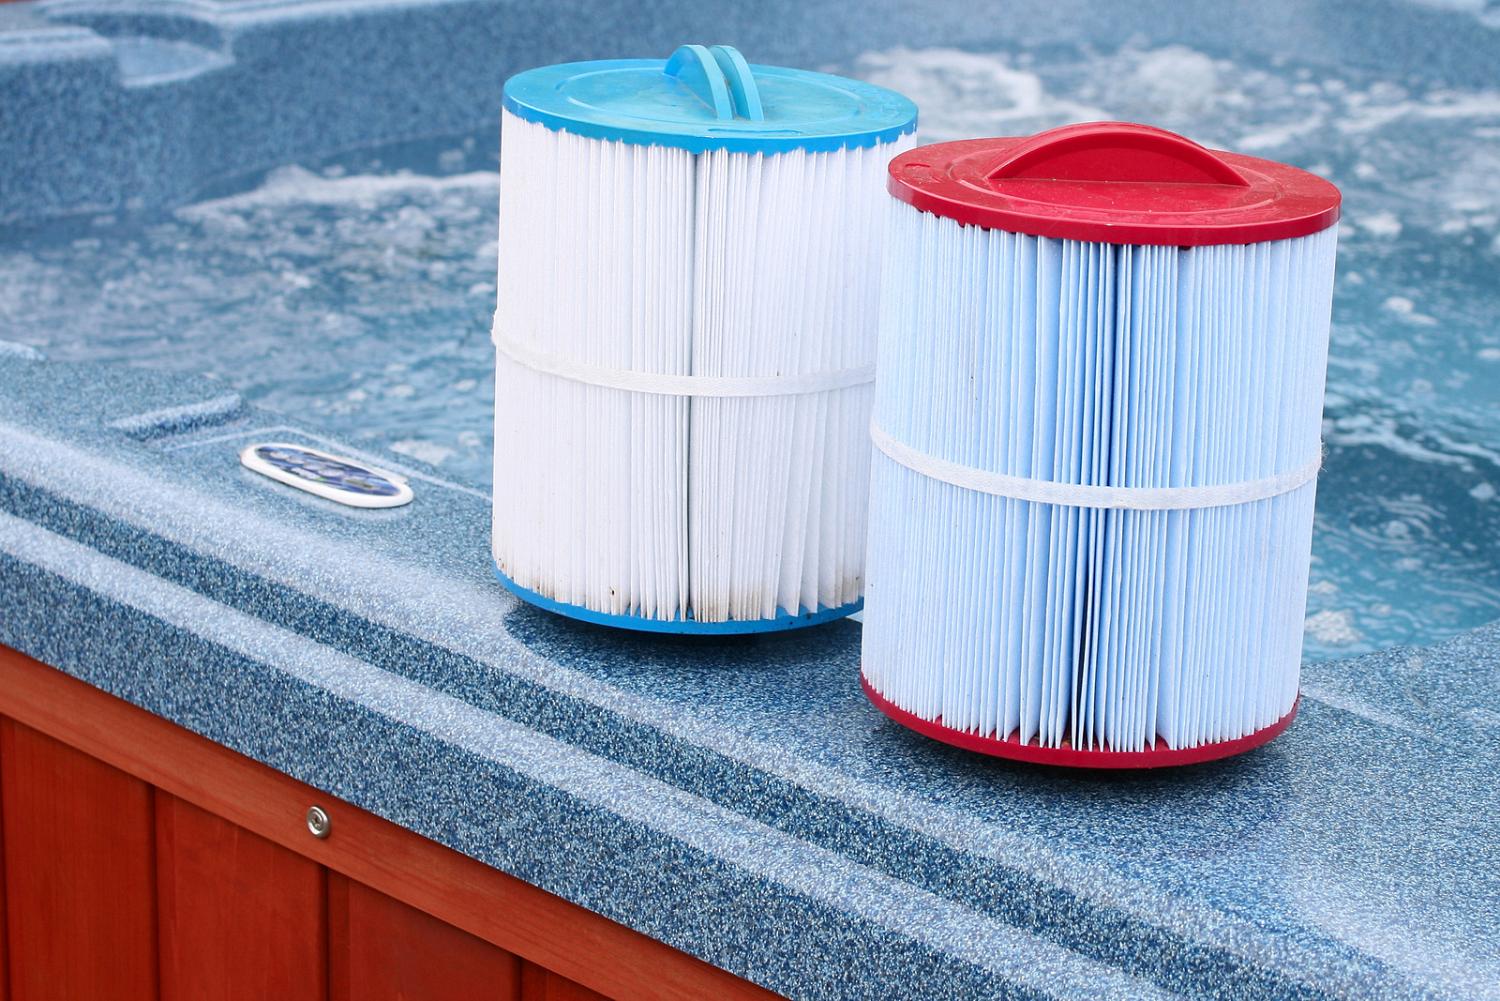 Filters for a hot tub or swimming pool